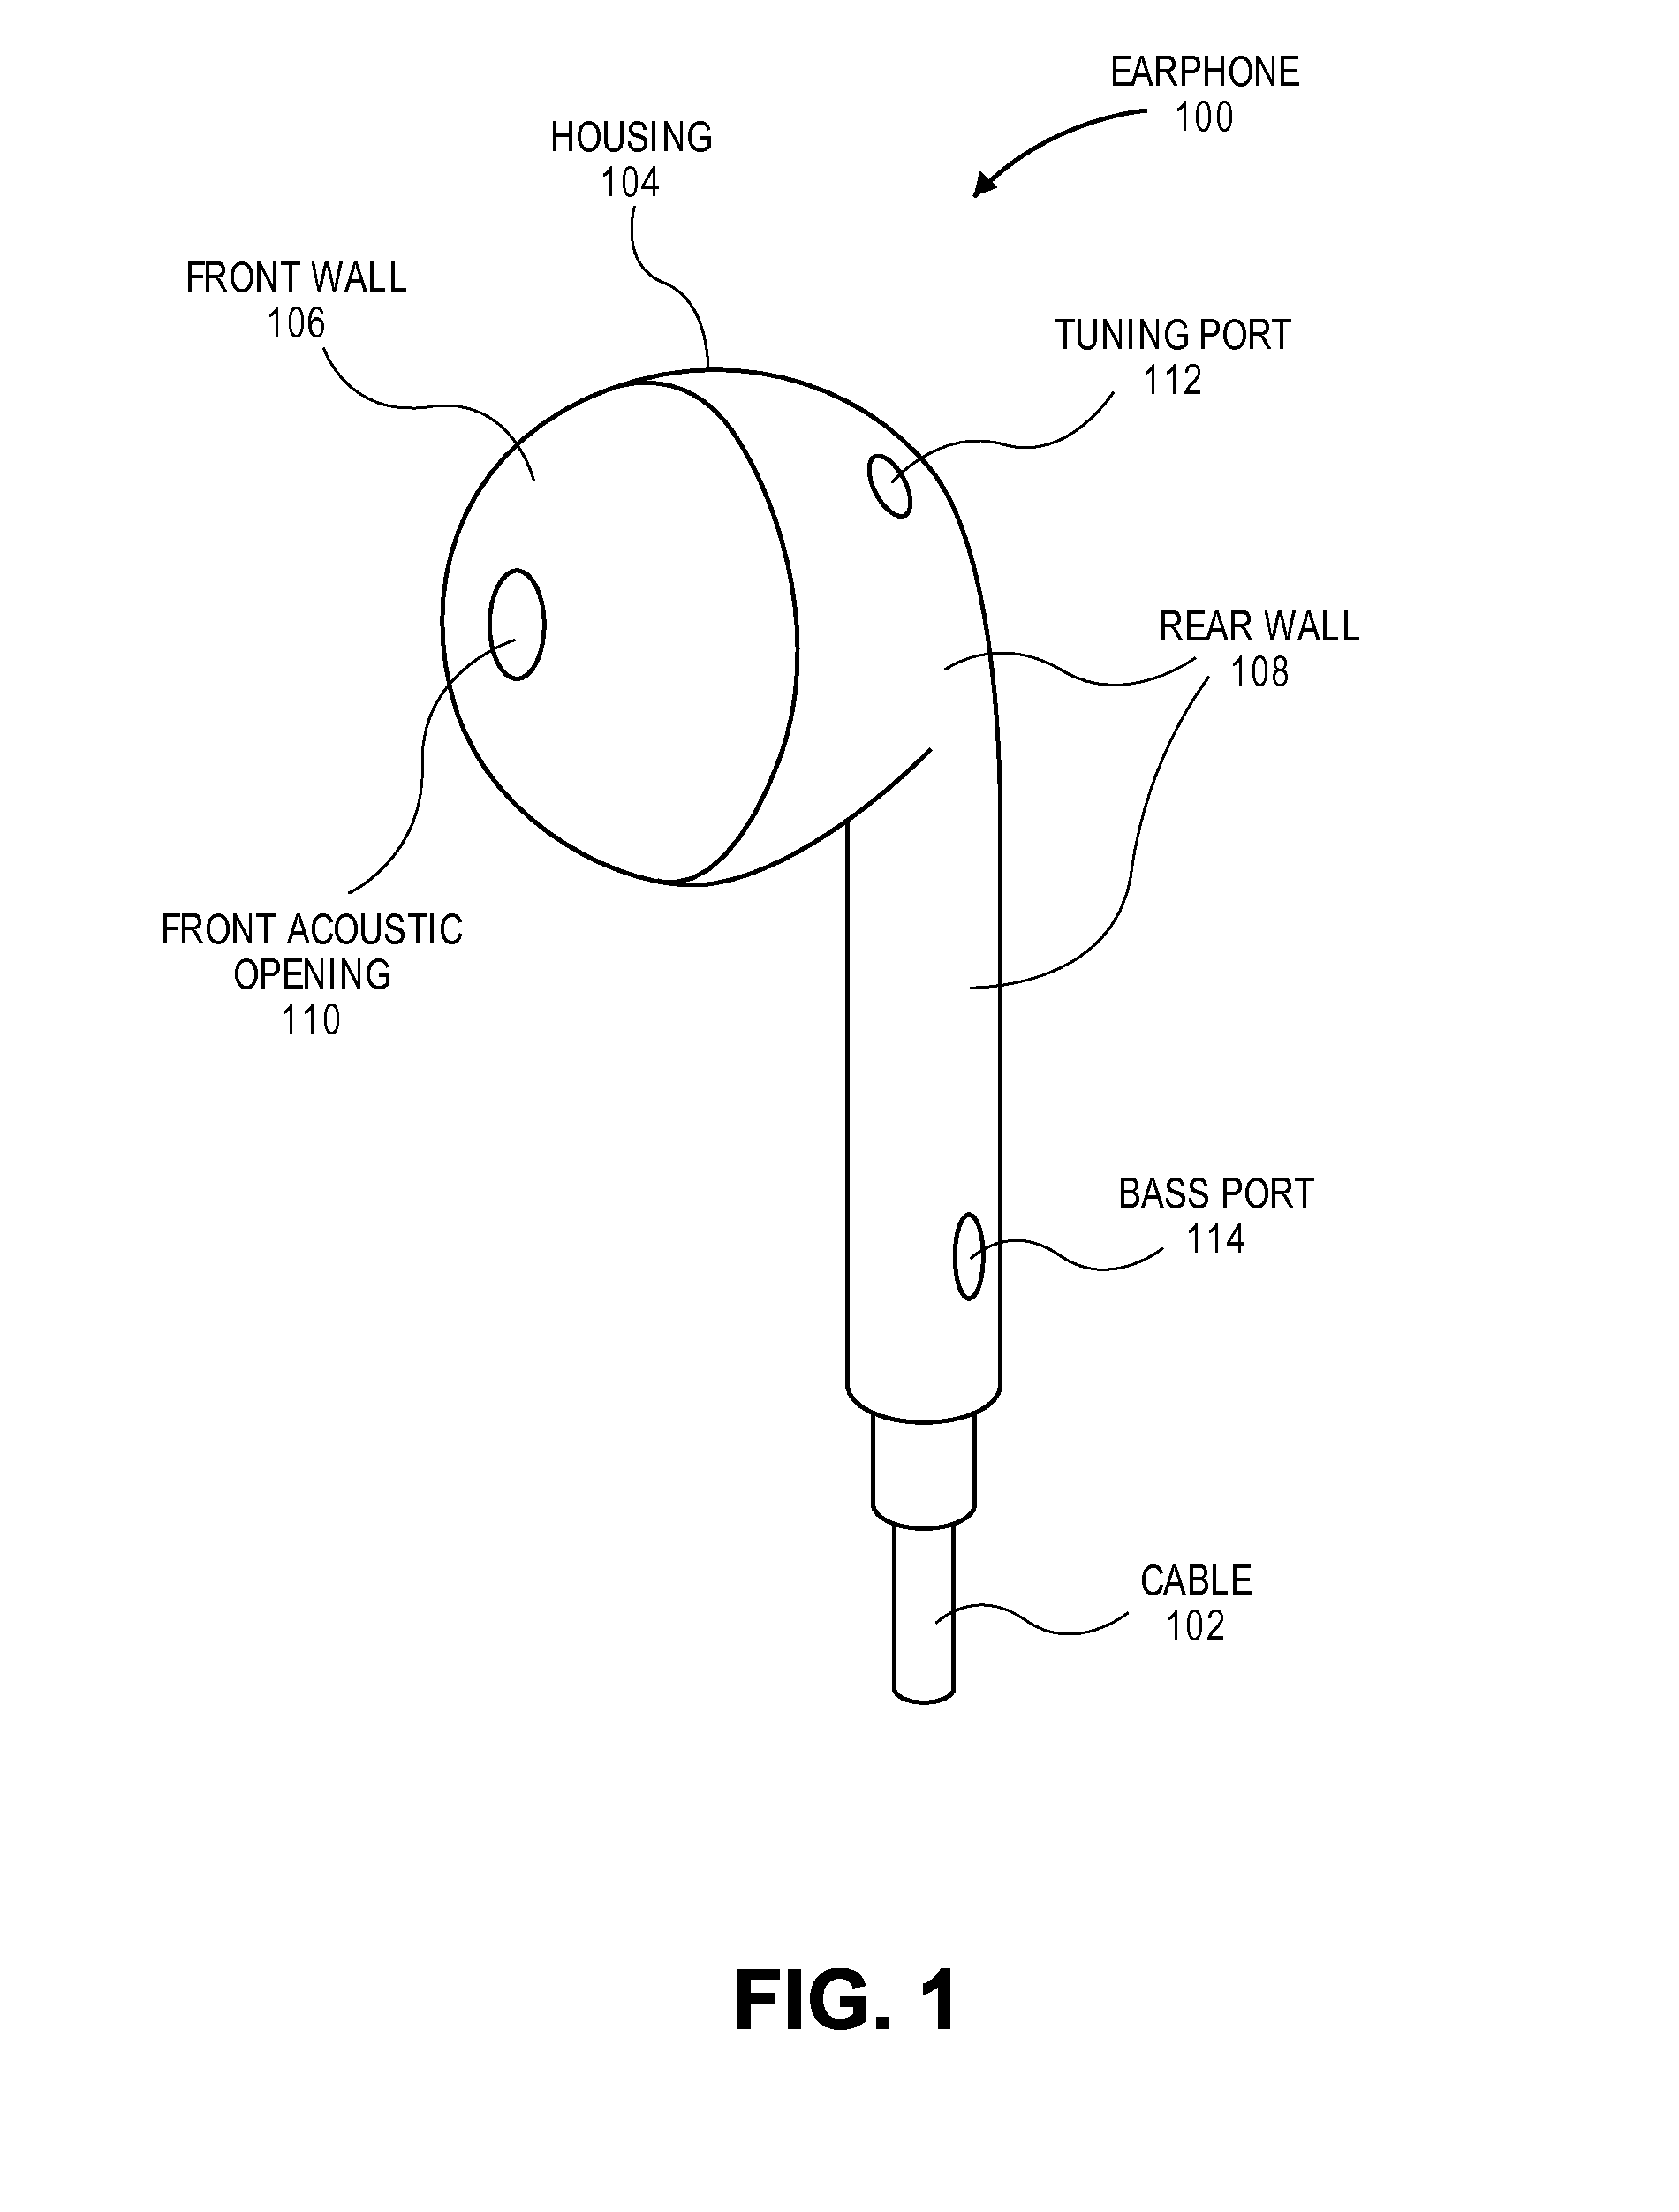 Mass loaded earbud with vent chamber